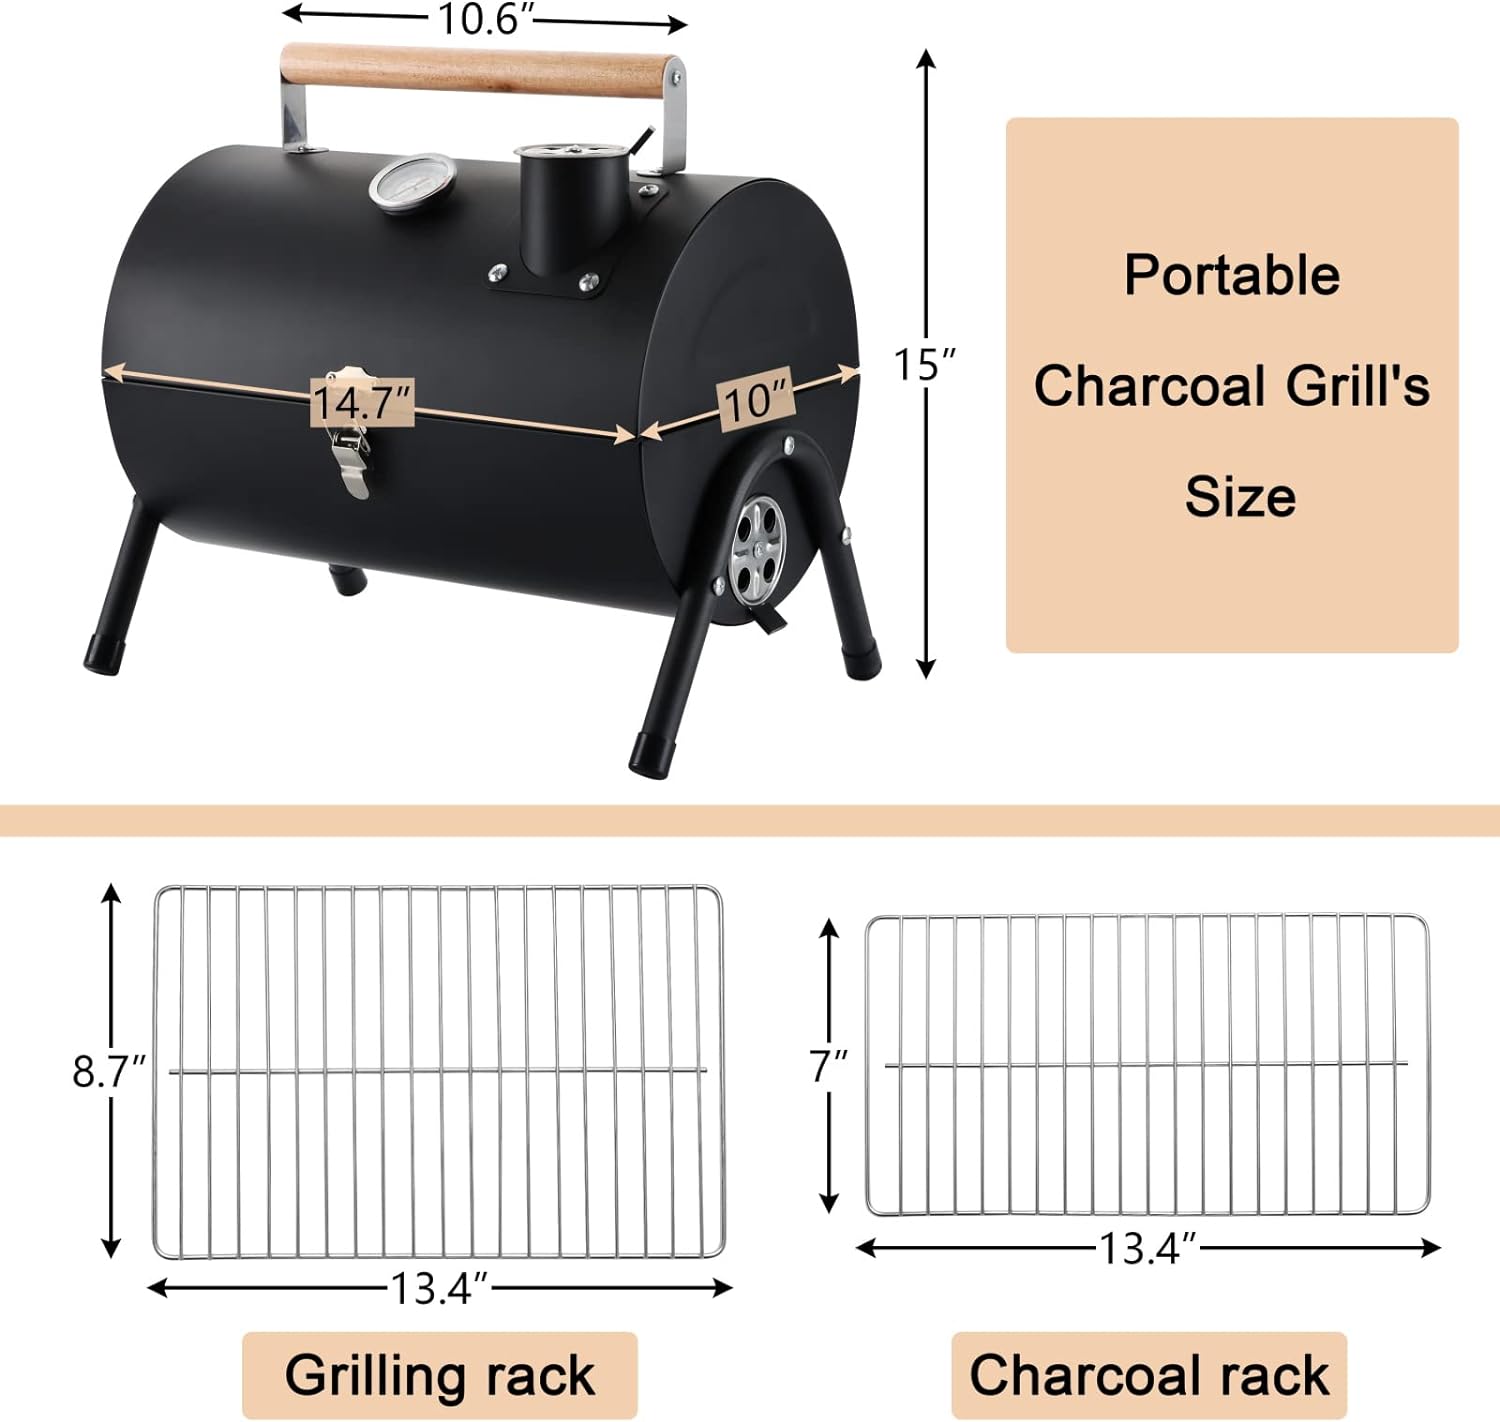 HaSteeL Portable Charcoal Grill, Small Folding Outdoor Grill, Mini Black Barbecue Grill with Thermometer, Compact Tabletop BBQ Grill for Camping Picnic Backyard Patio, 116 Square Inches  Screwdriver